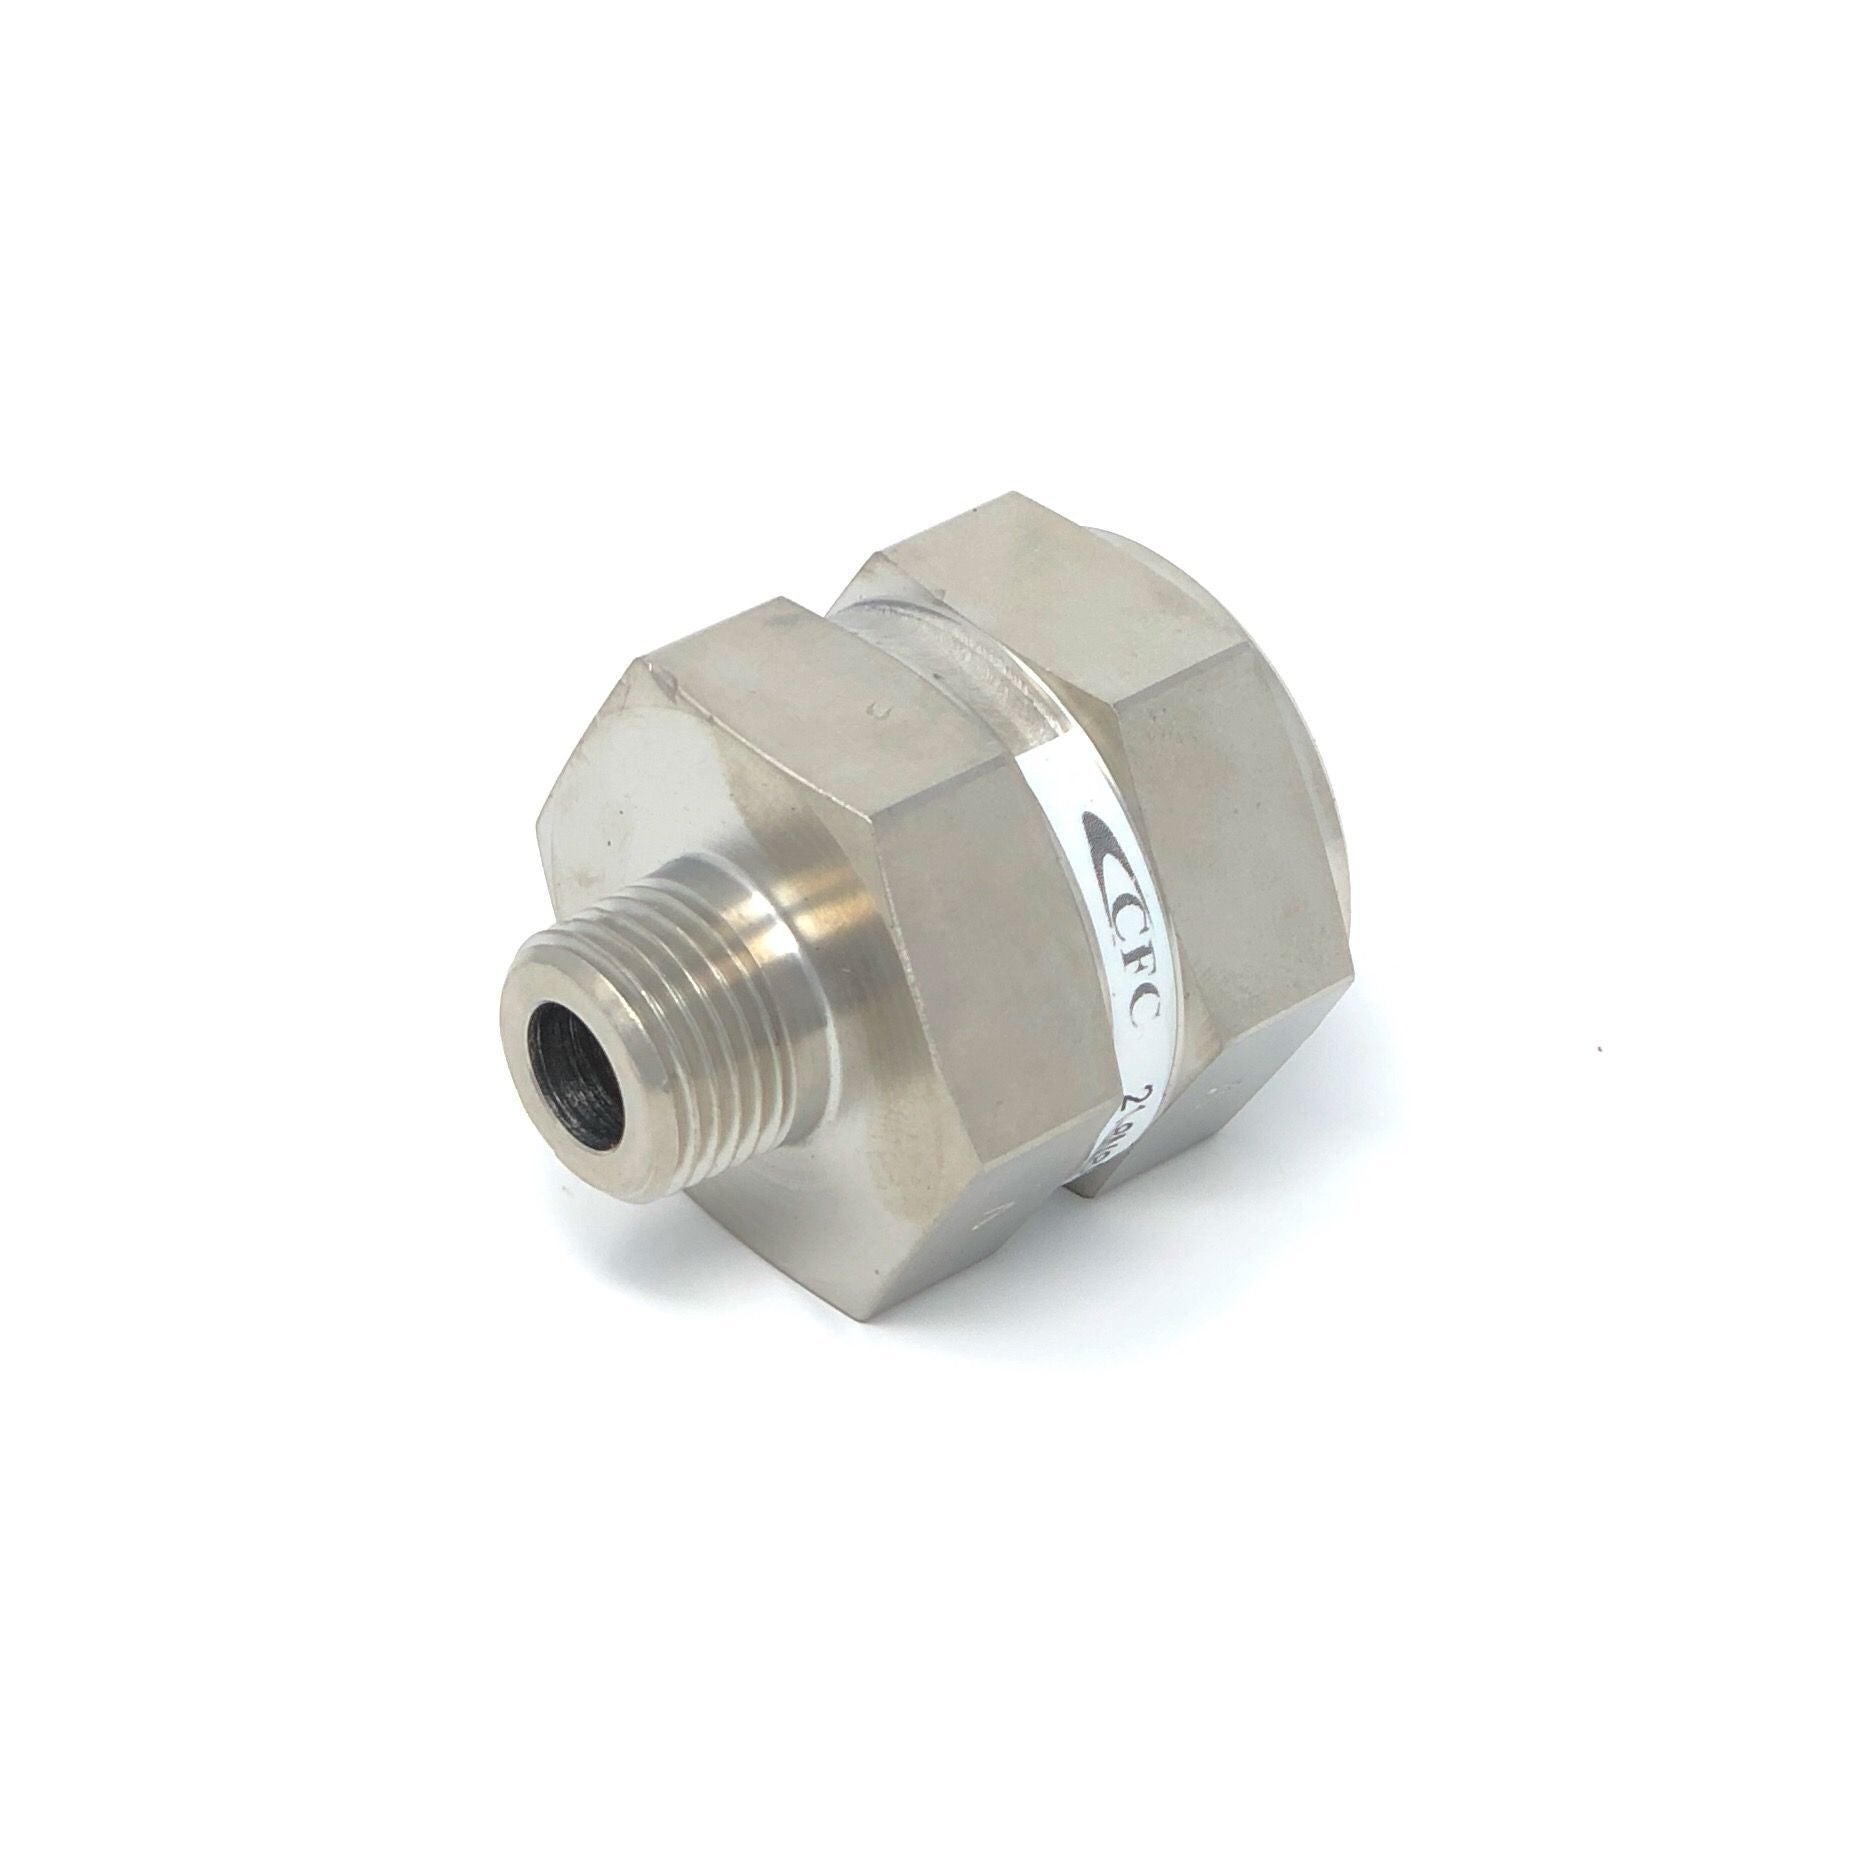 21-4M4M-10S : Chase High Pressure Inline Filter, 6000psi, #4 SAE (1/4"), 10 Micron, No Visual Indicator, No Bypass